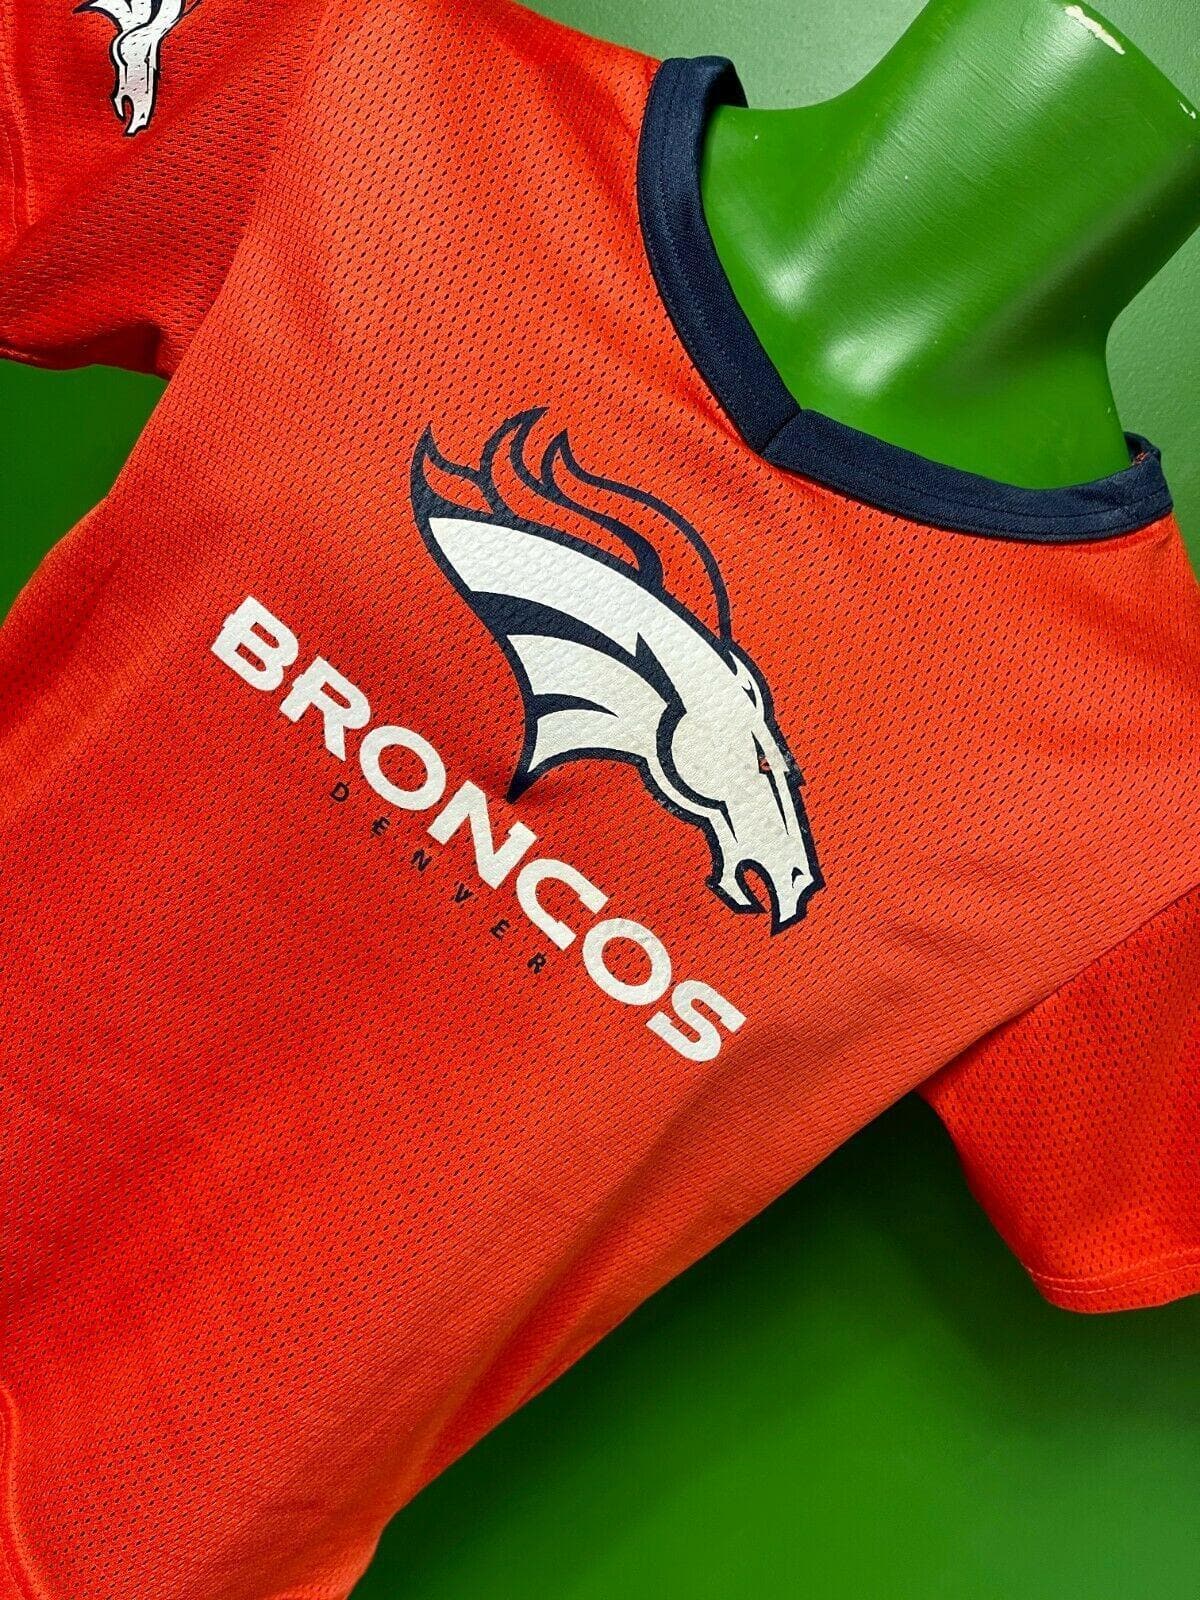 NFL Denver Broncos #88 Franklin Jersey - Top Mesh Youth Small 6-8